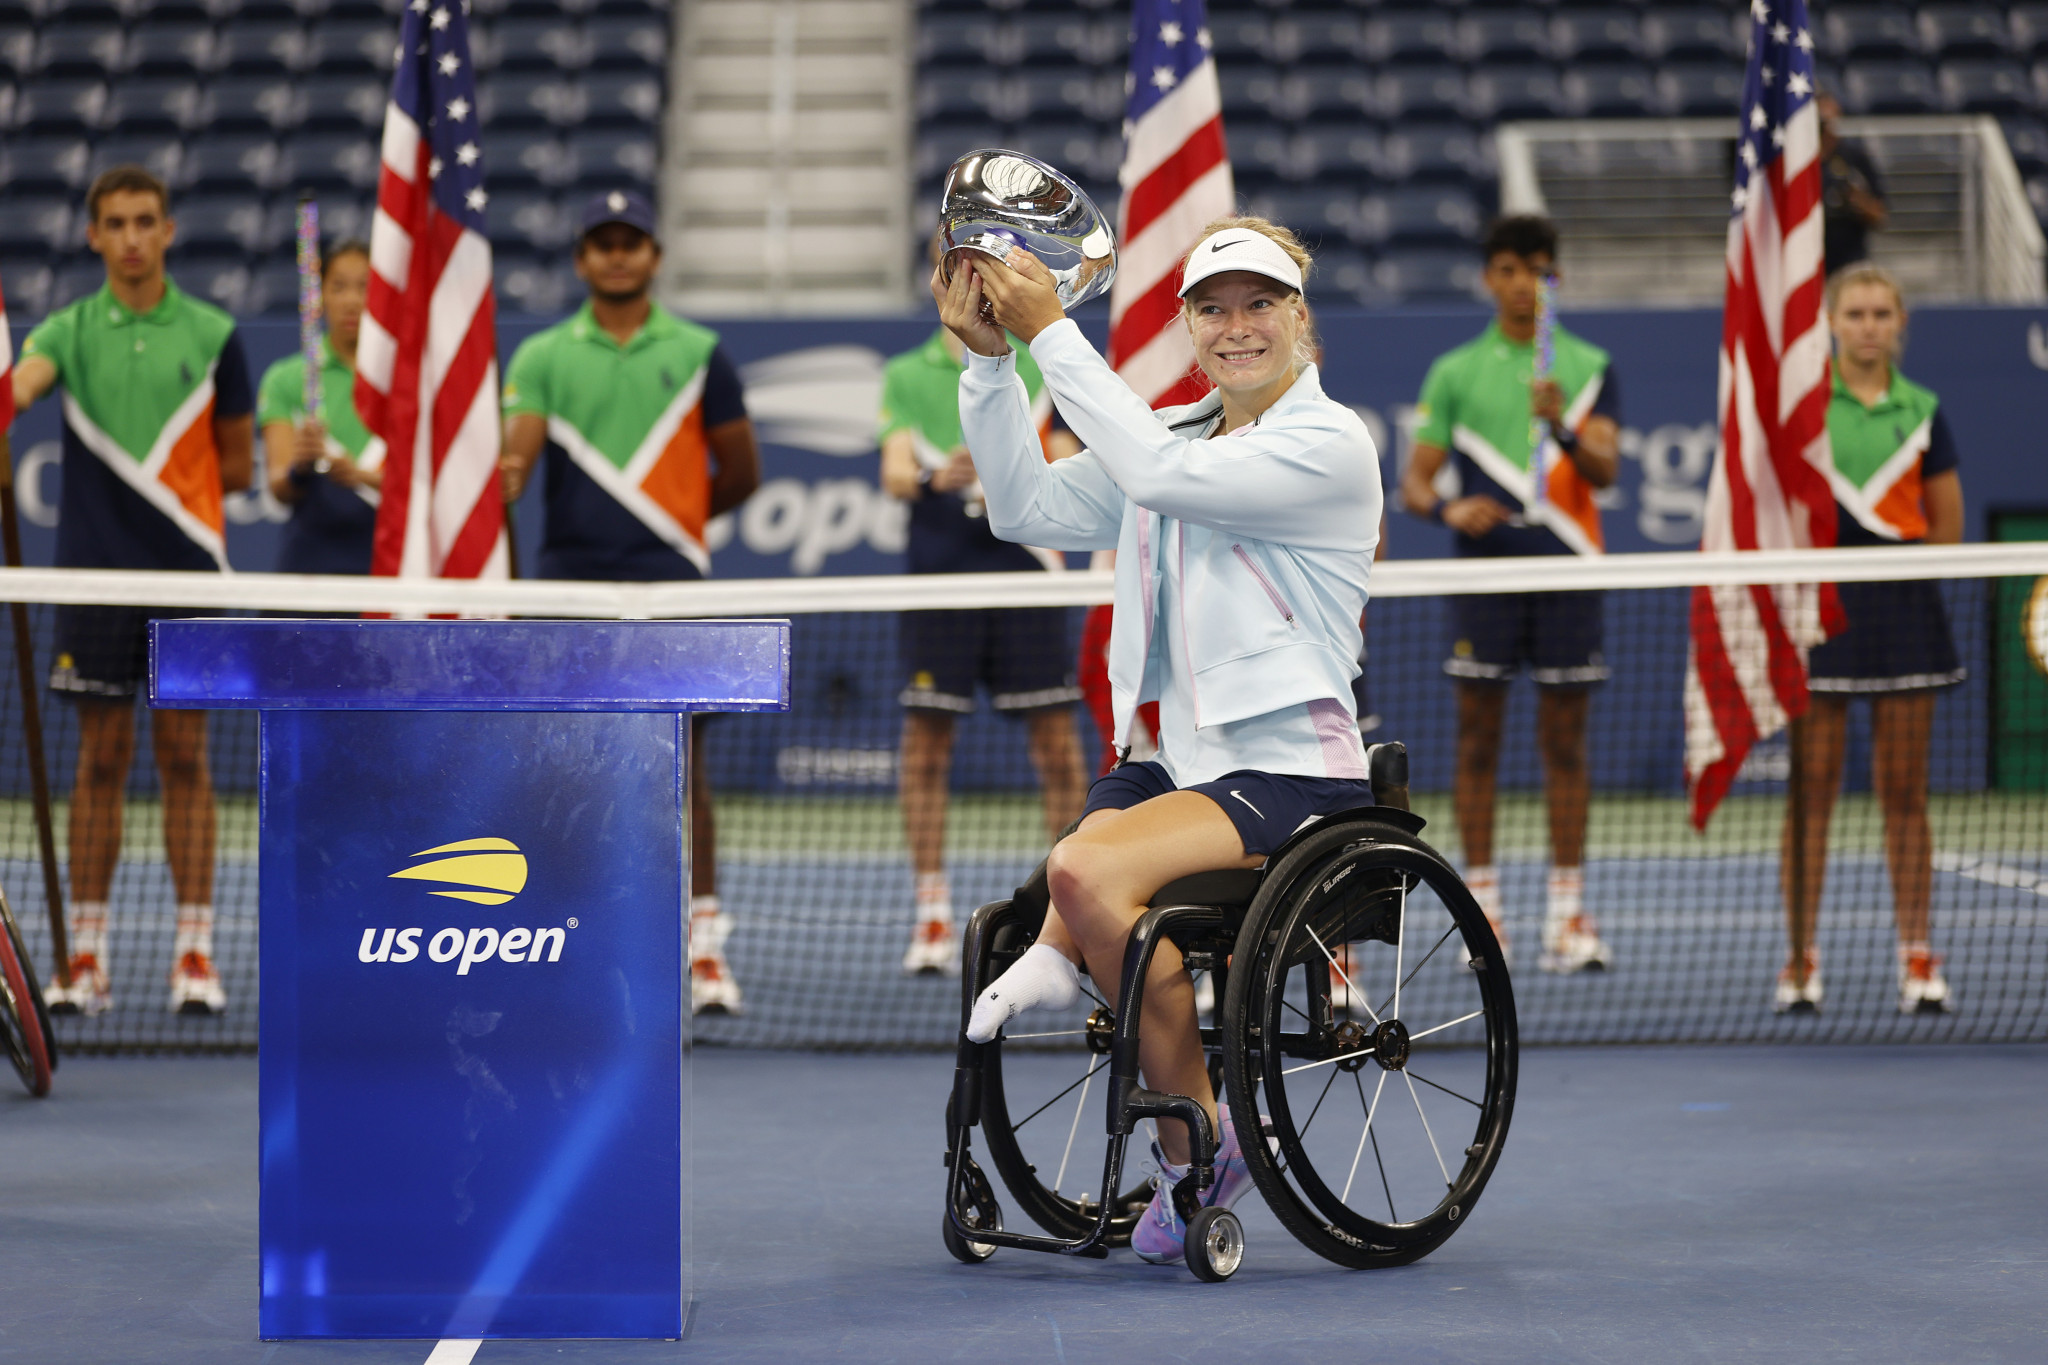 Diede De Groot defended the women's wheelchair singles title at the US Open, completing a calendar Grand Slam for the second year in a row in the process ©Getty Images